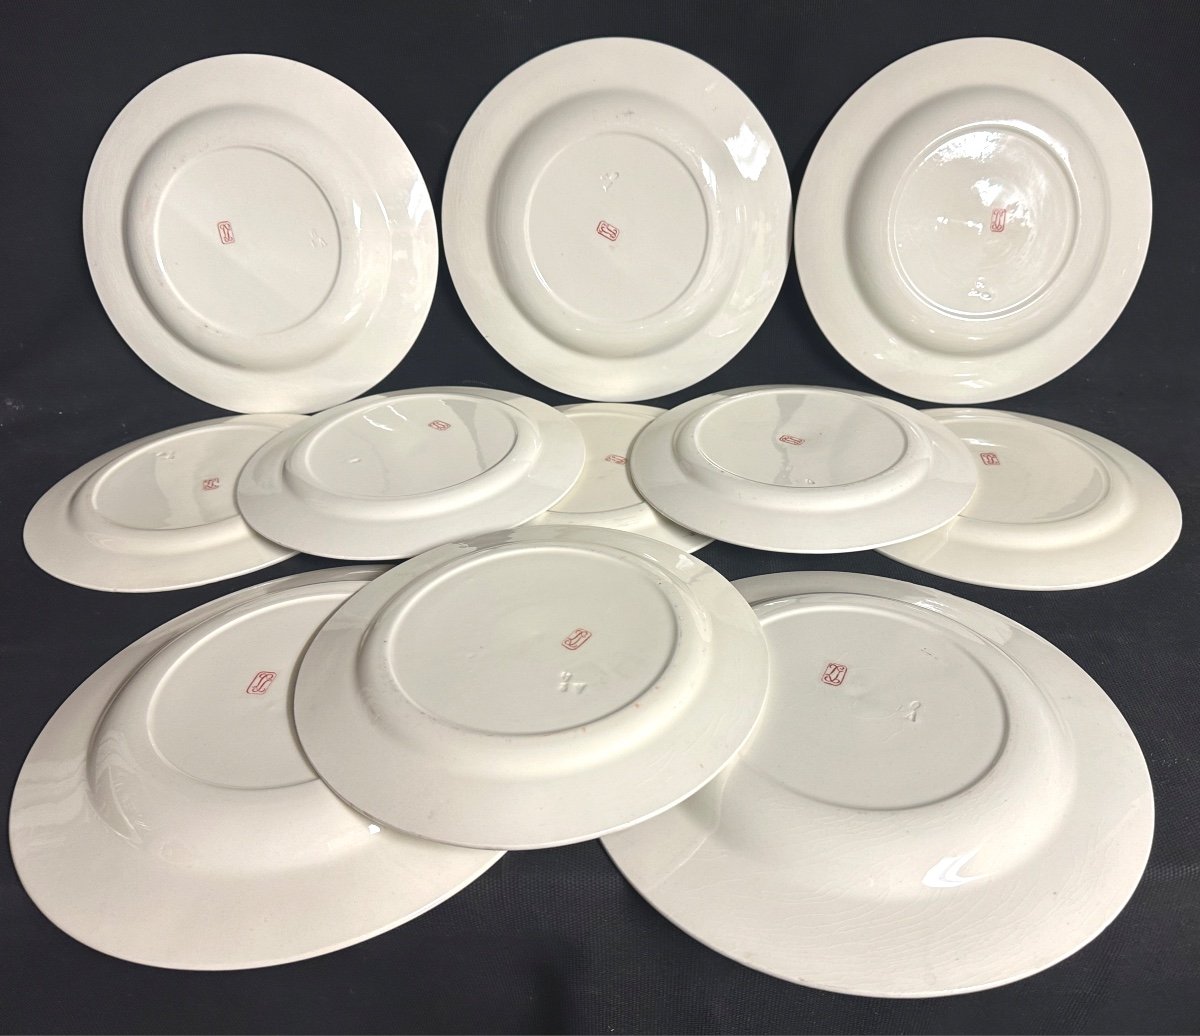 Jean Luce 1885-1964 Part Of Art Deco Table Service 11 Plates In Very Good Condition -photo-4